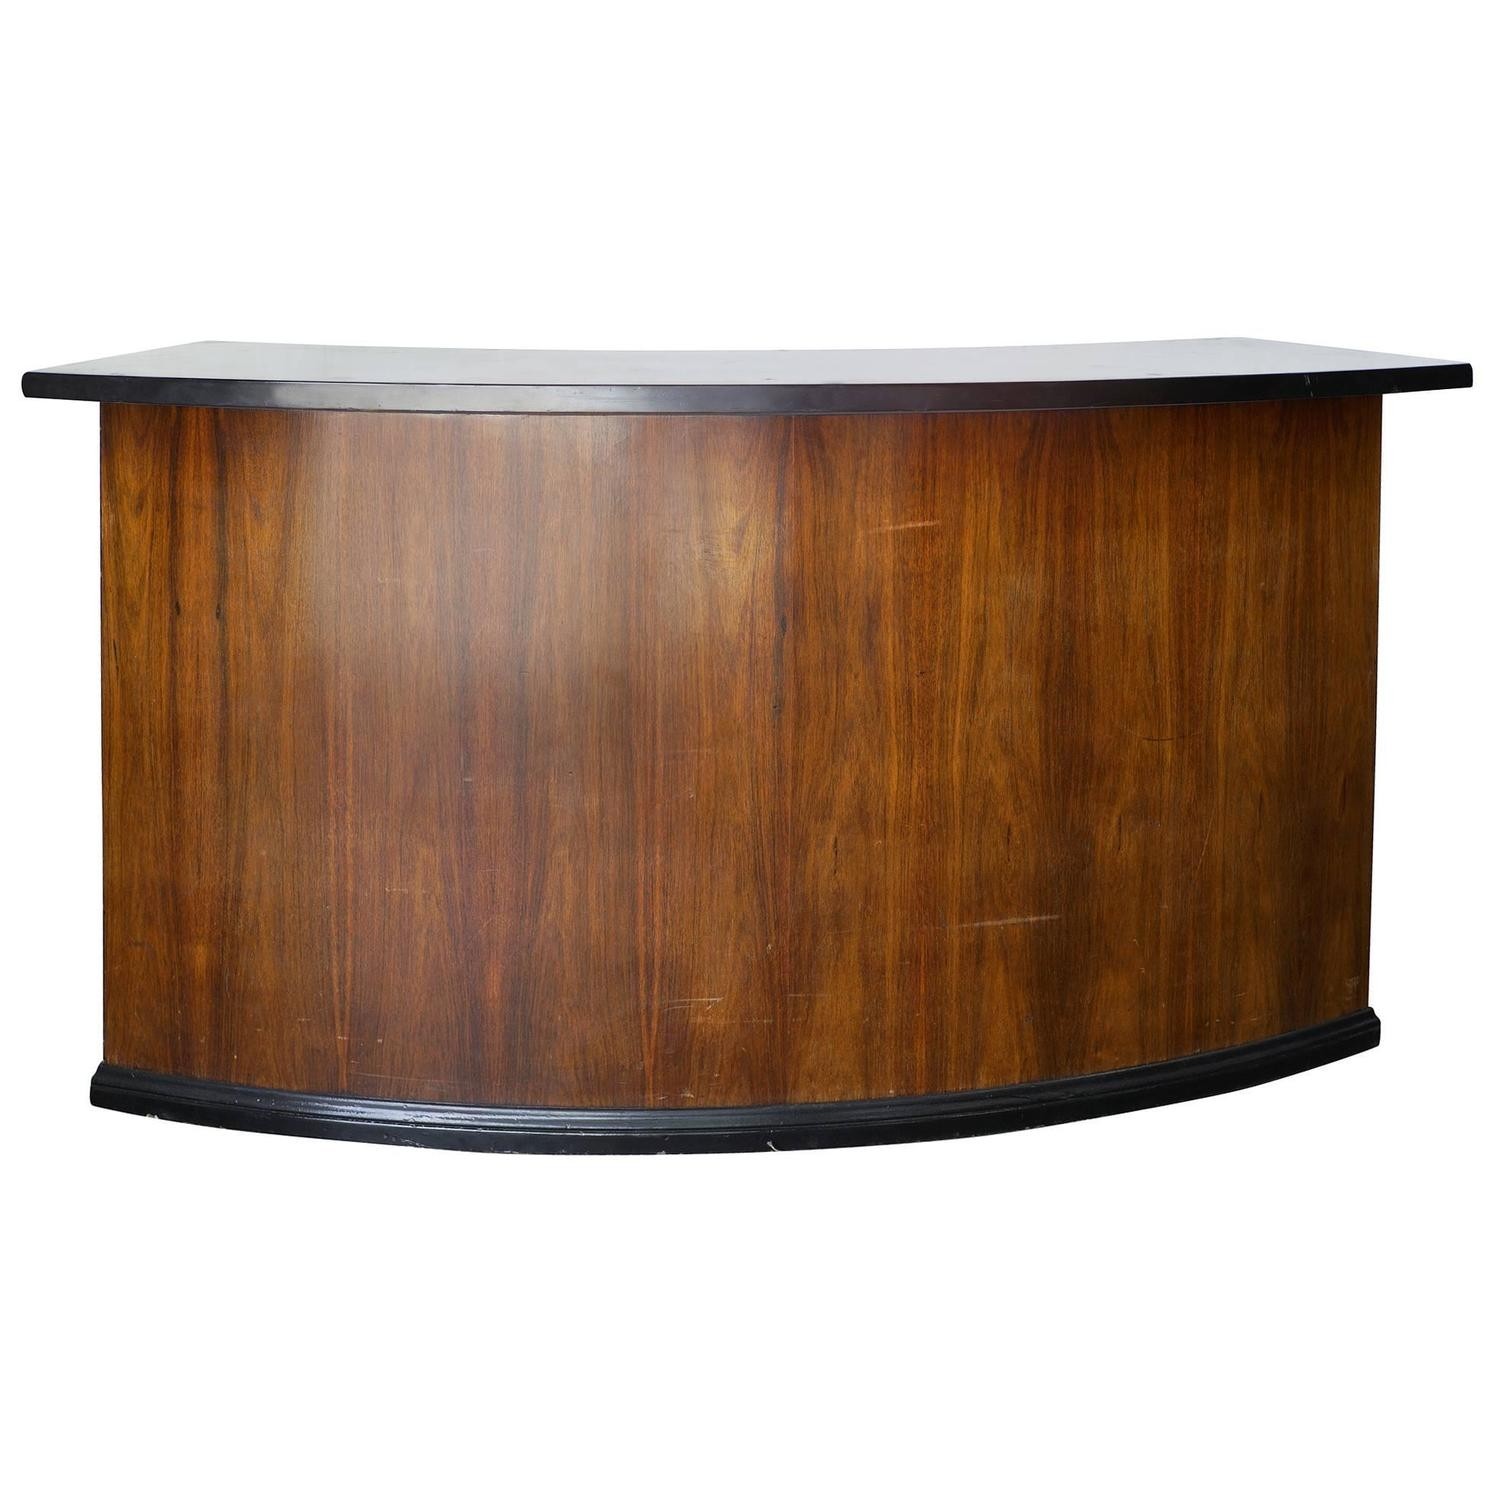 Art deco curved mahogany and black lacquer cocktail bar